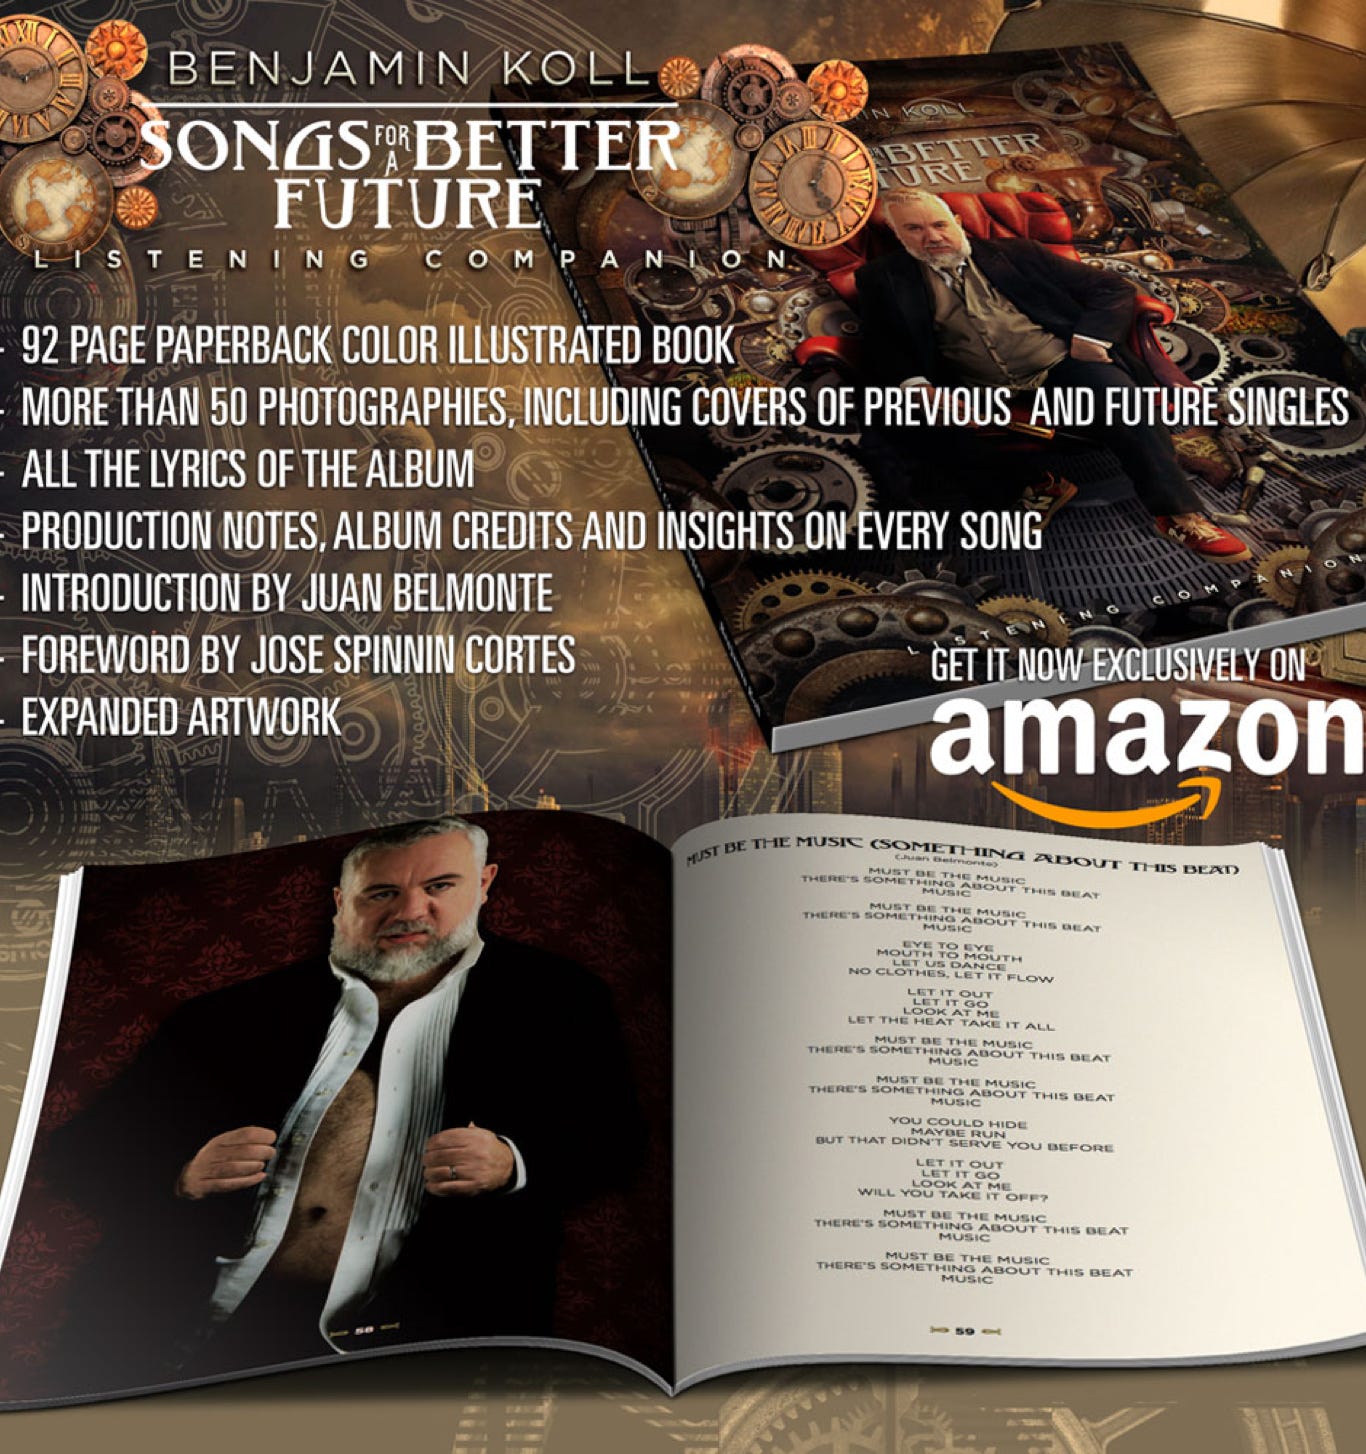 Get the Songs For A Better Future - Listening Companion paperback photo book here